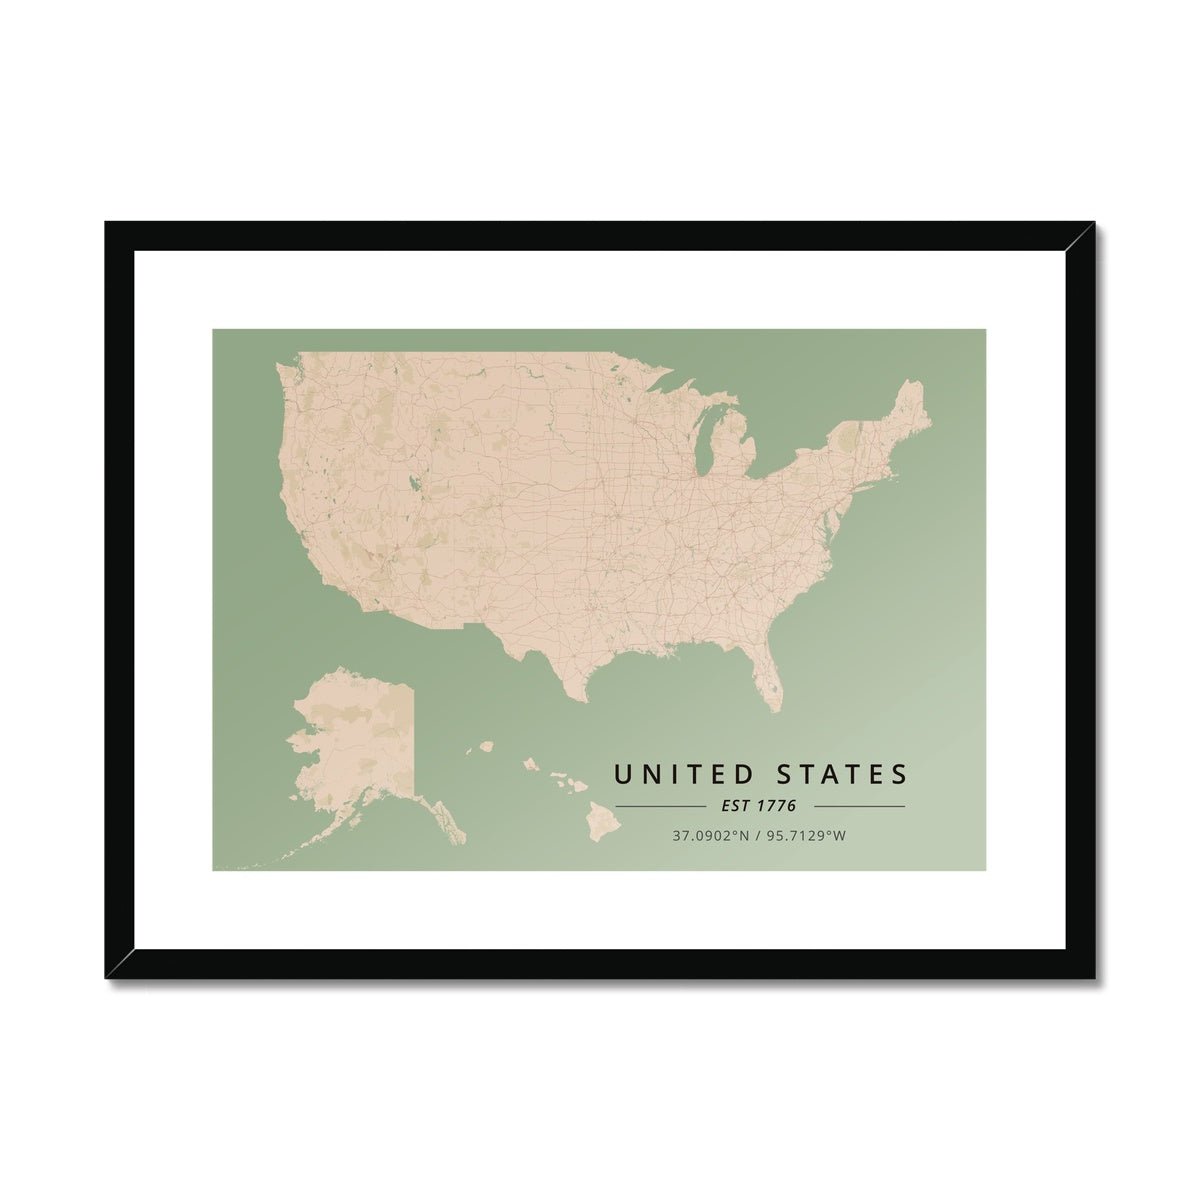 Vintage - United States 2 - Map Matte Print by doingly